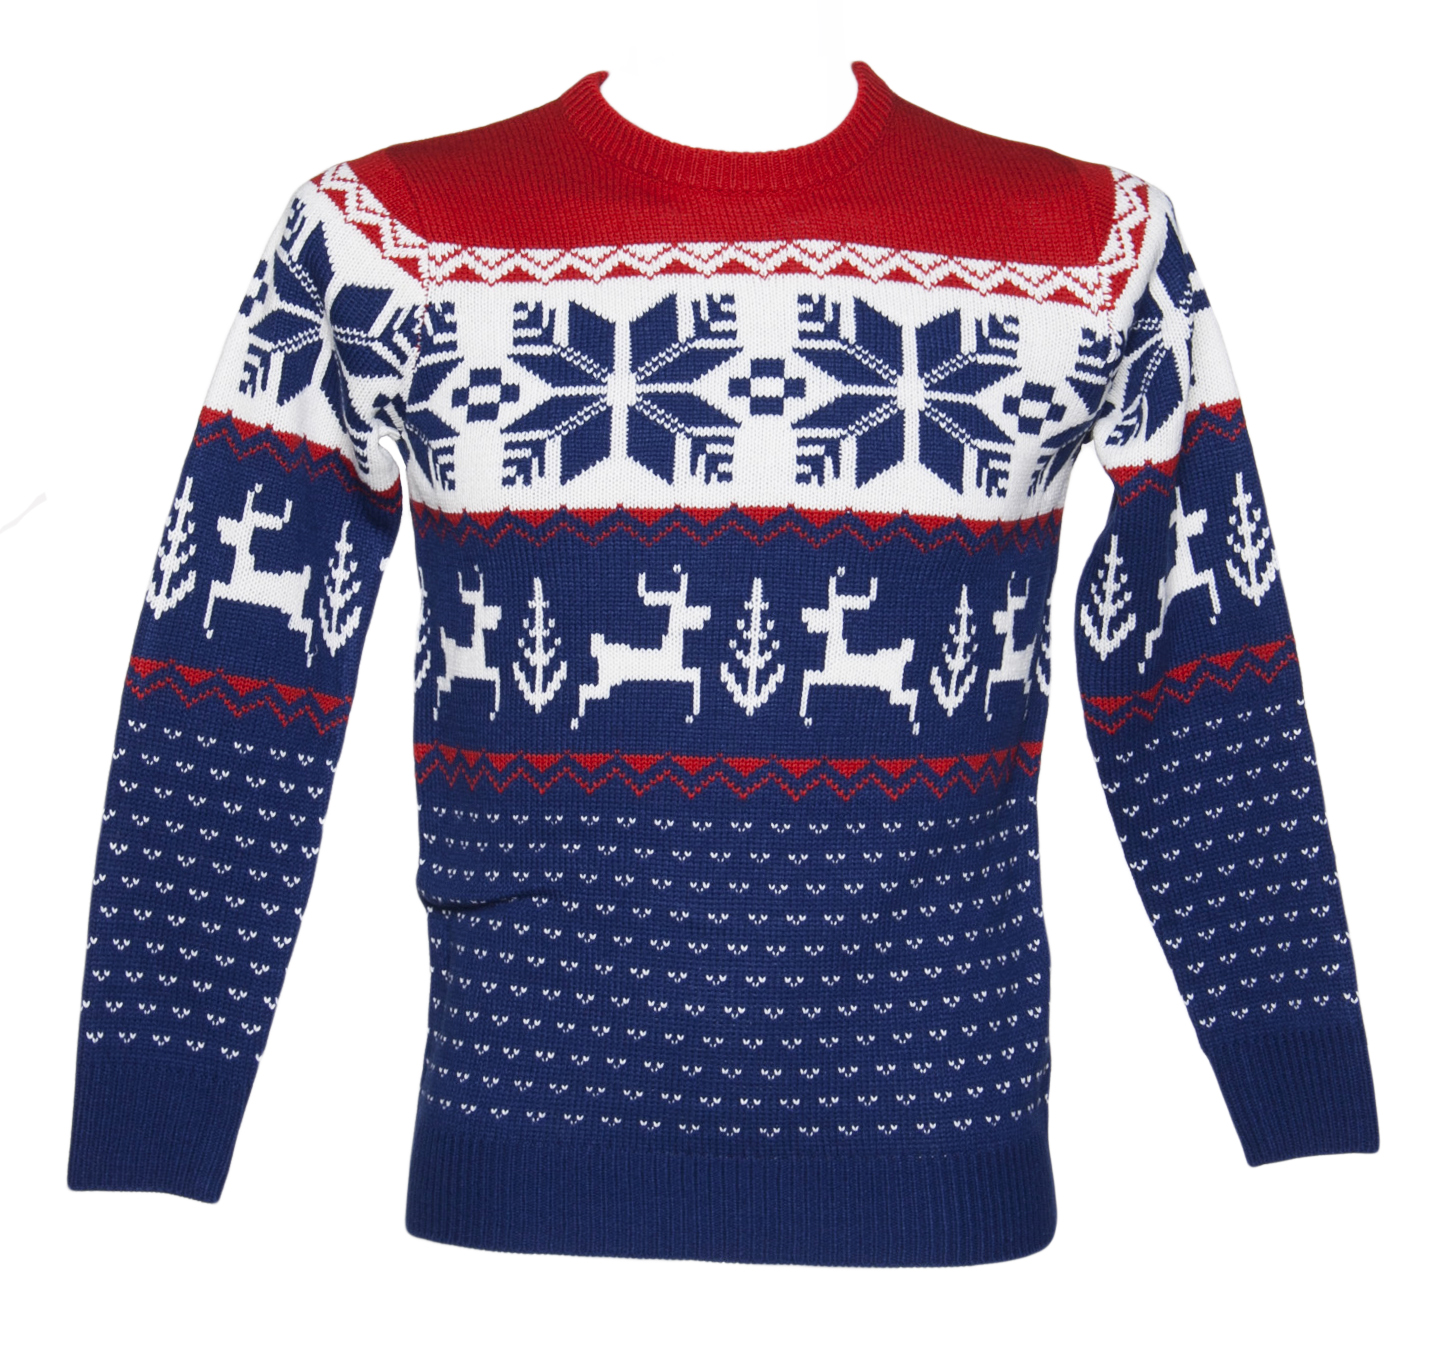 Unisex Blue and Red Wonderland Knitted Christmas